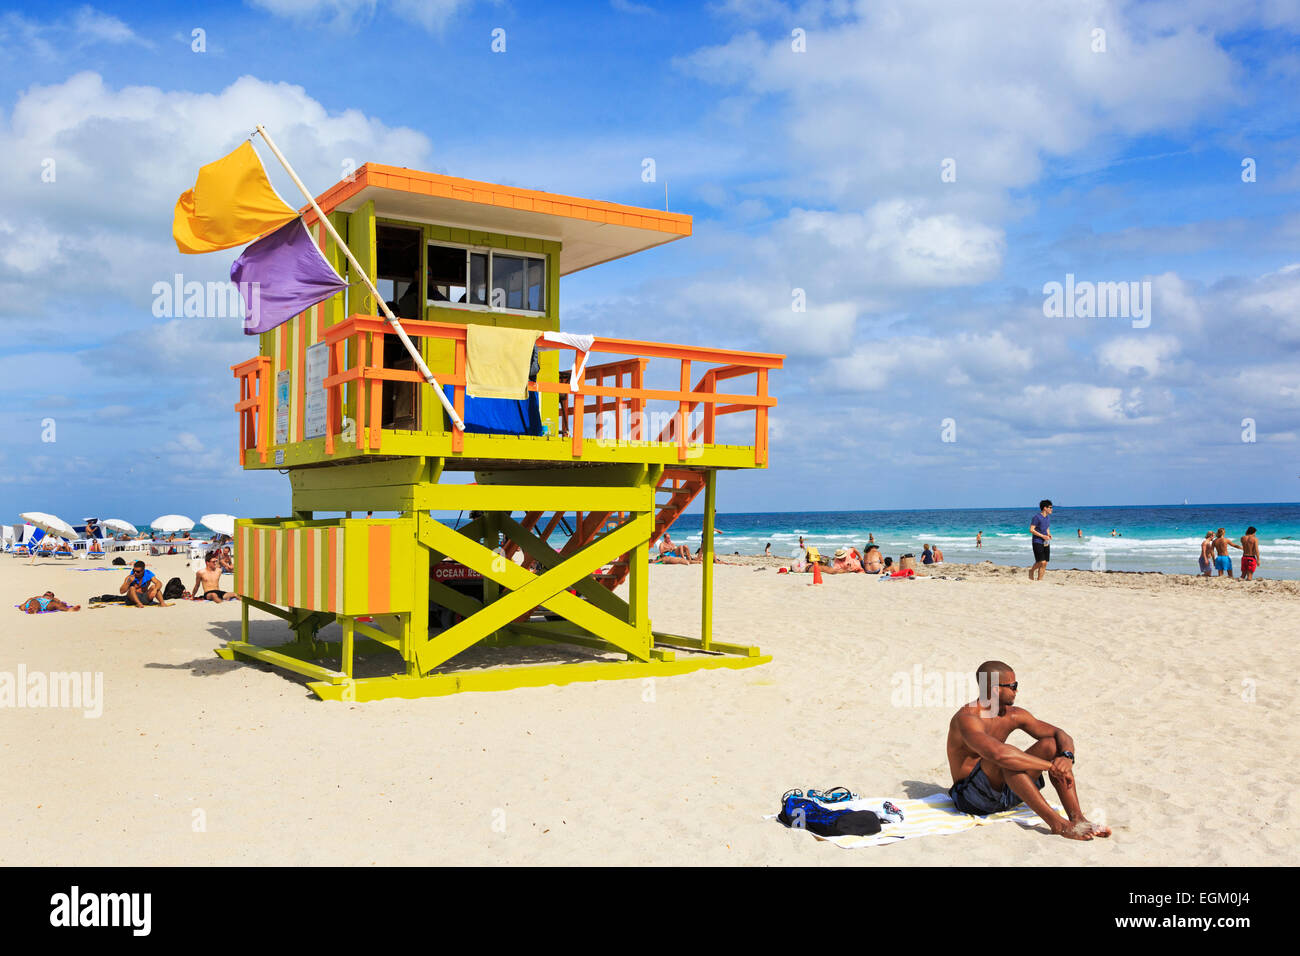 South Beach, Ocean View, Miami with the pacific Ocean and wooden lifeguard shelter, Miami, Florida, USA Stock Photo